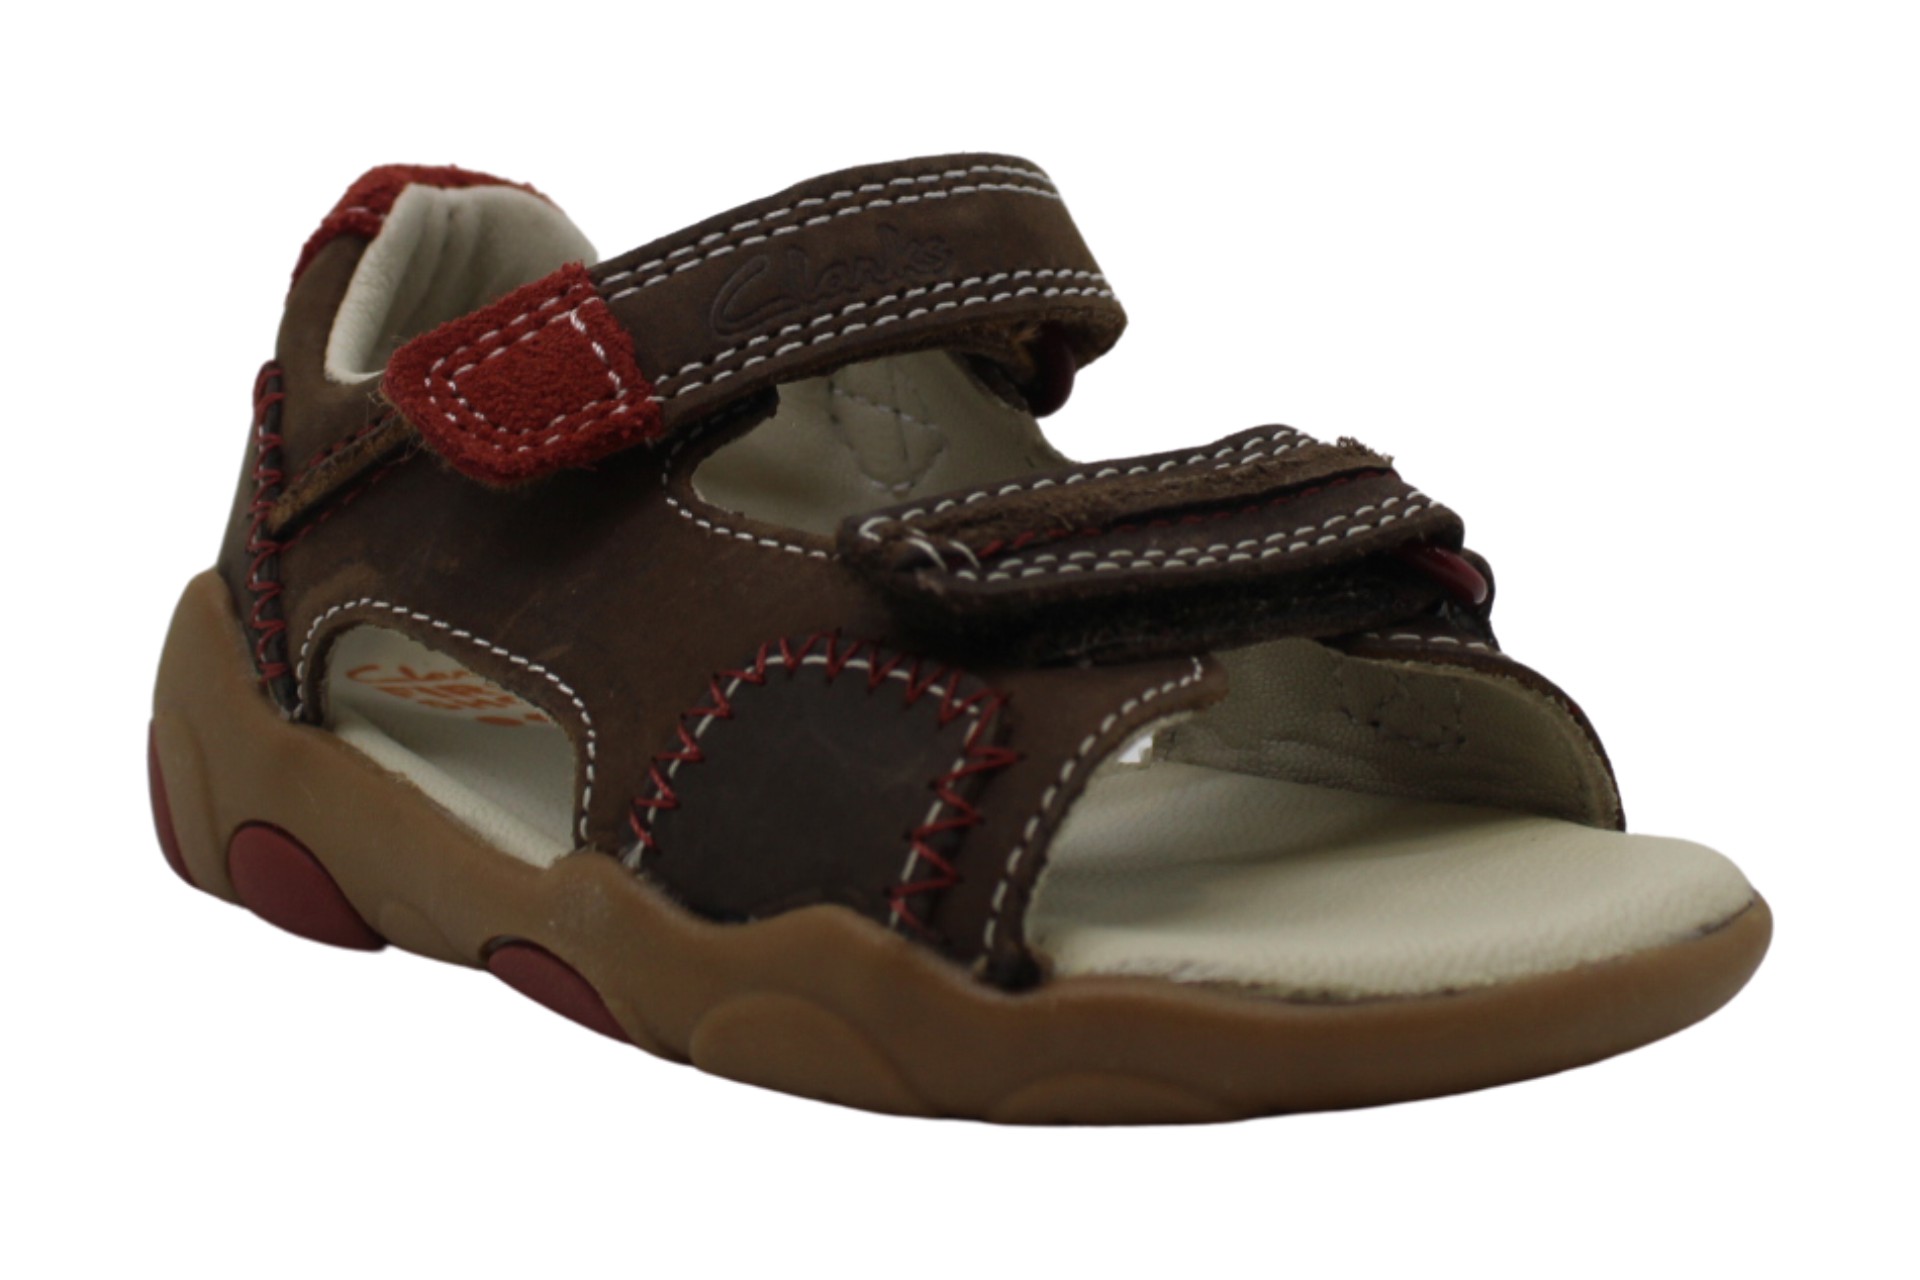 Clarks Children Shoes 26100239 Leather, Brown/burgundy, Size Toddler 5. ...